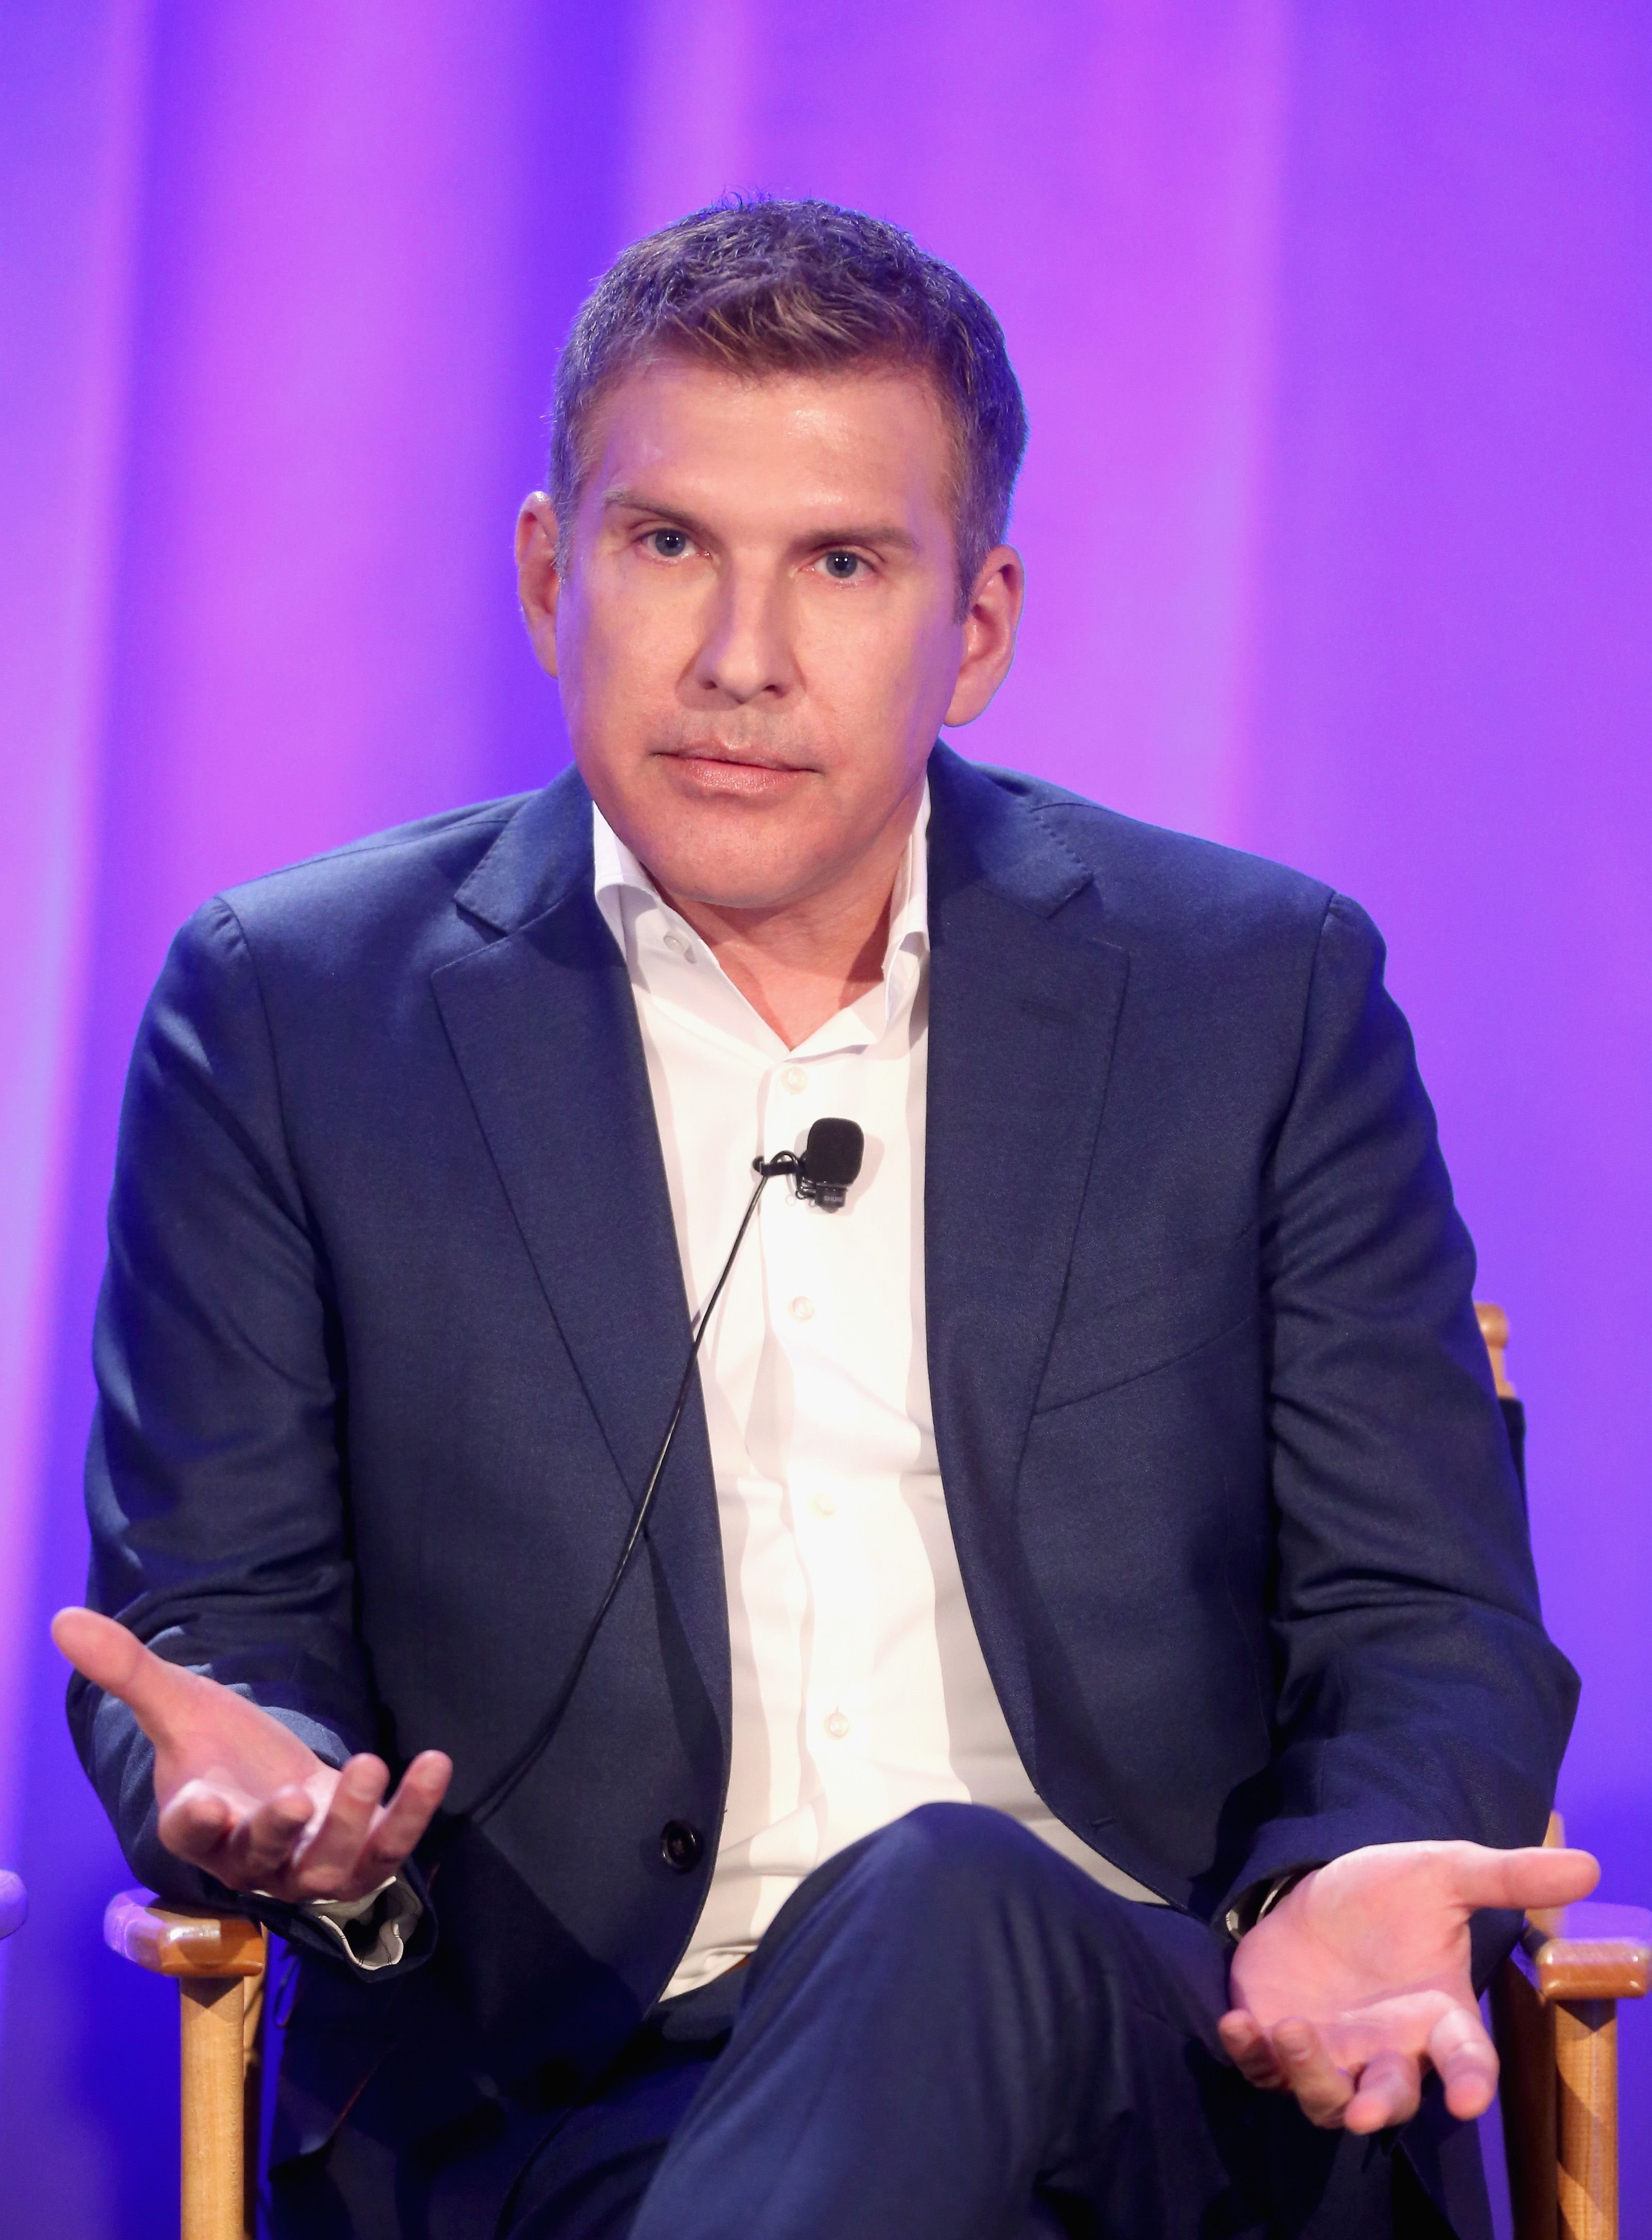 Todd Chrisley at the 'Chrisley Knows Best' panel at the 2016 NBCUniversal Summer Press Day at Four Seasons Hotel Westlake Village on April 1, 2016 in Westlake Village, California | Photo: Getty Images